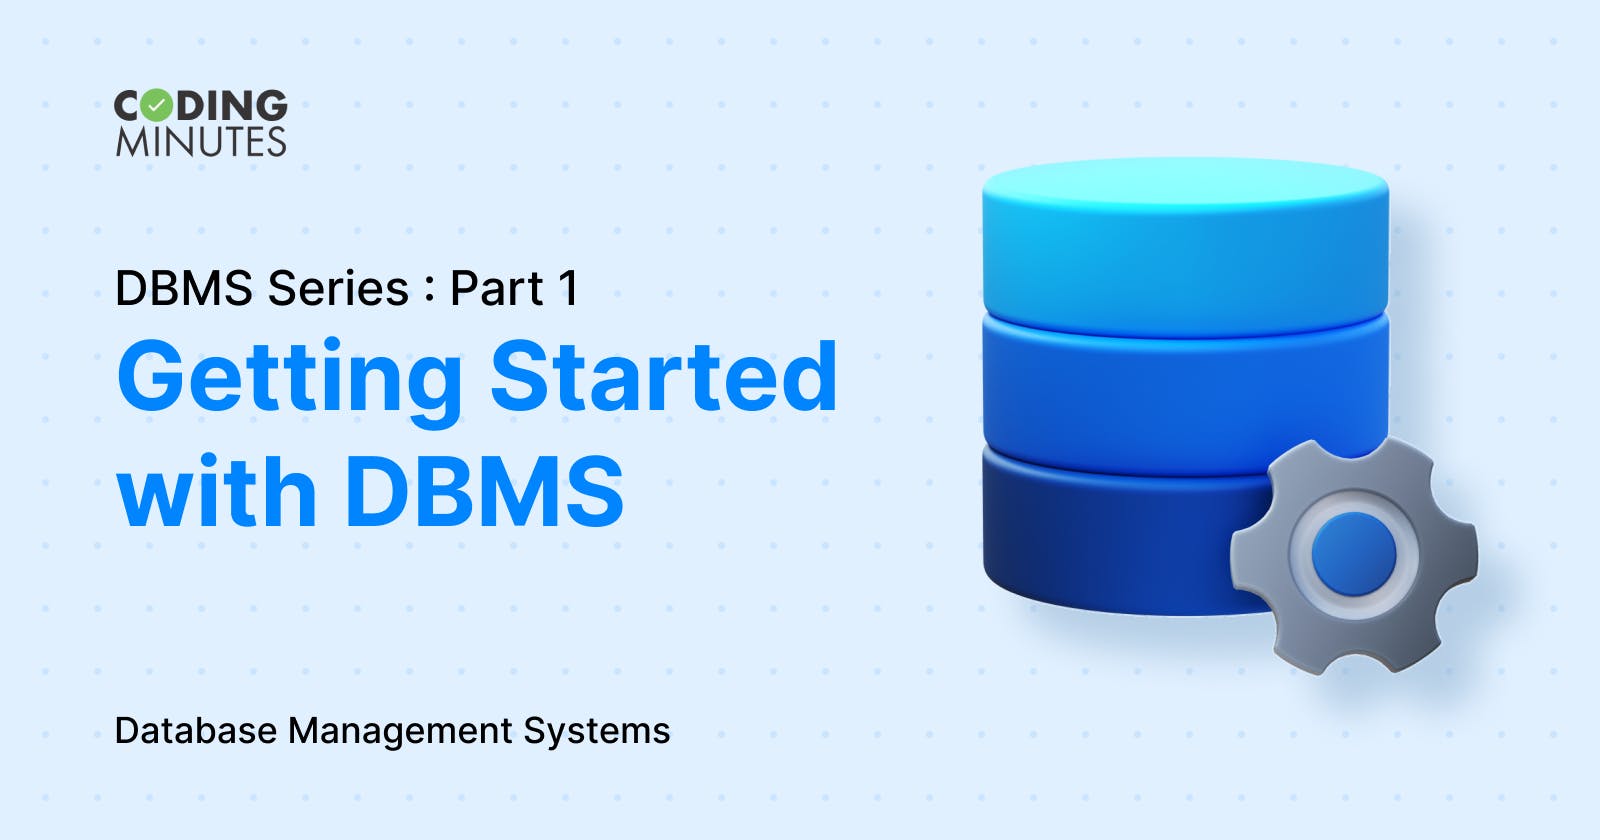 DBMS Series Part 1: Getting Started with DBMS